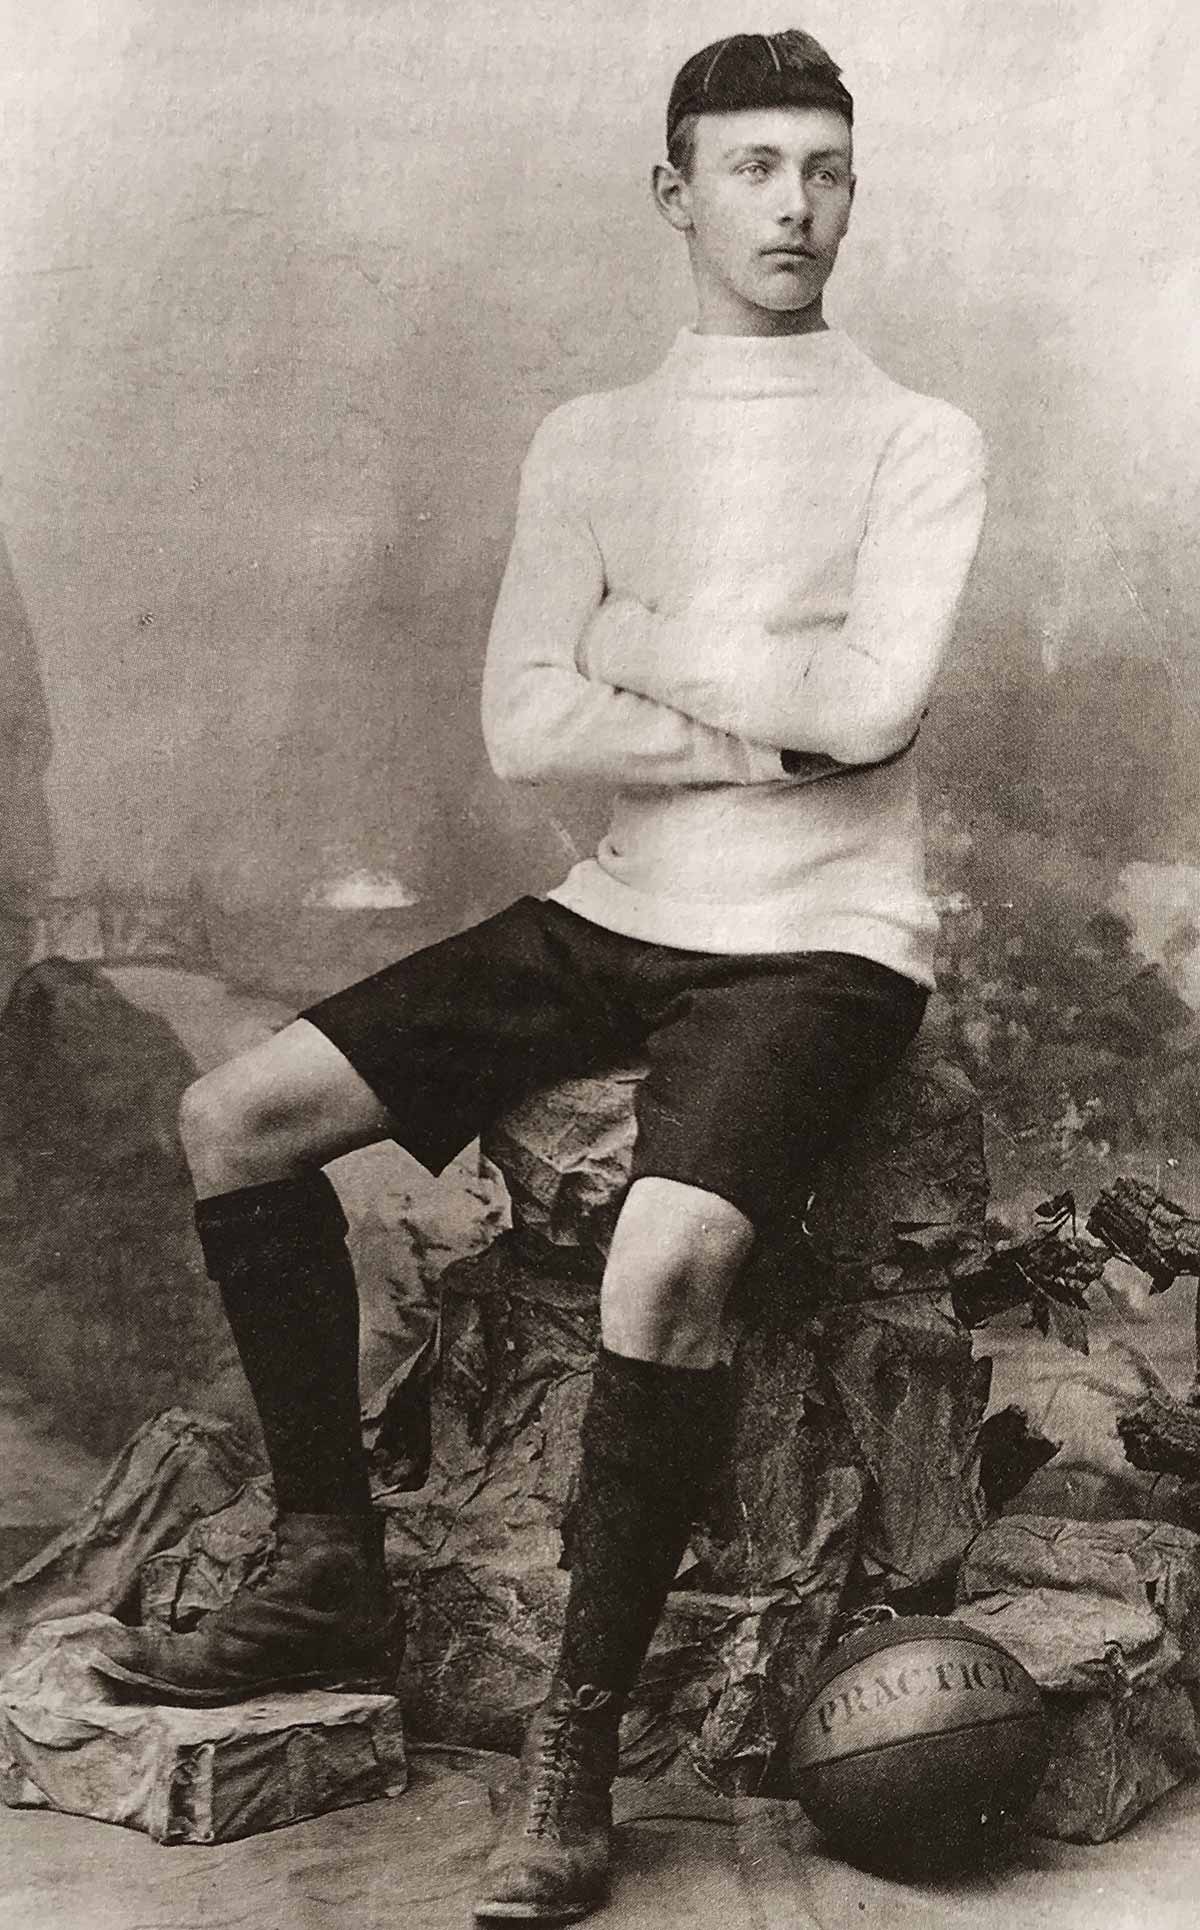 Hans Gamper in a photo from 1896.